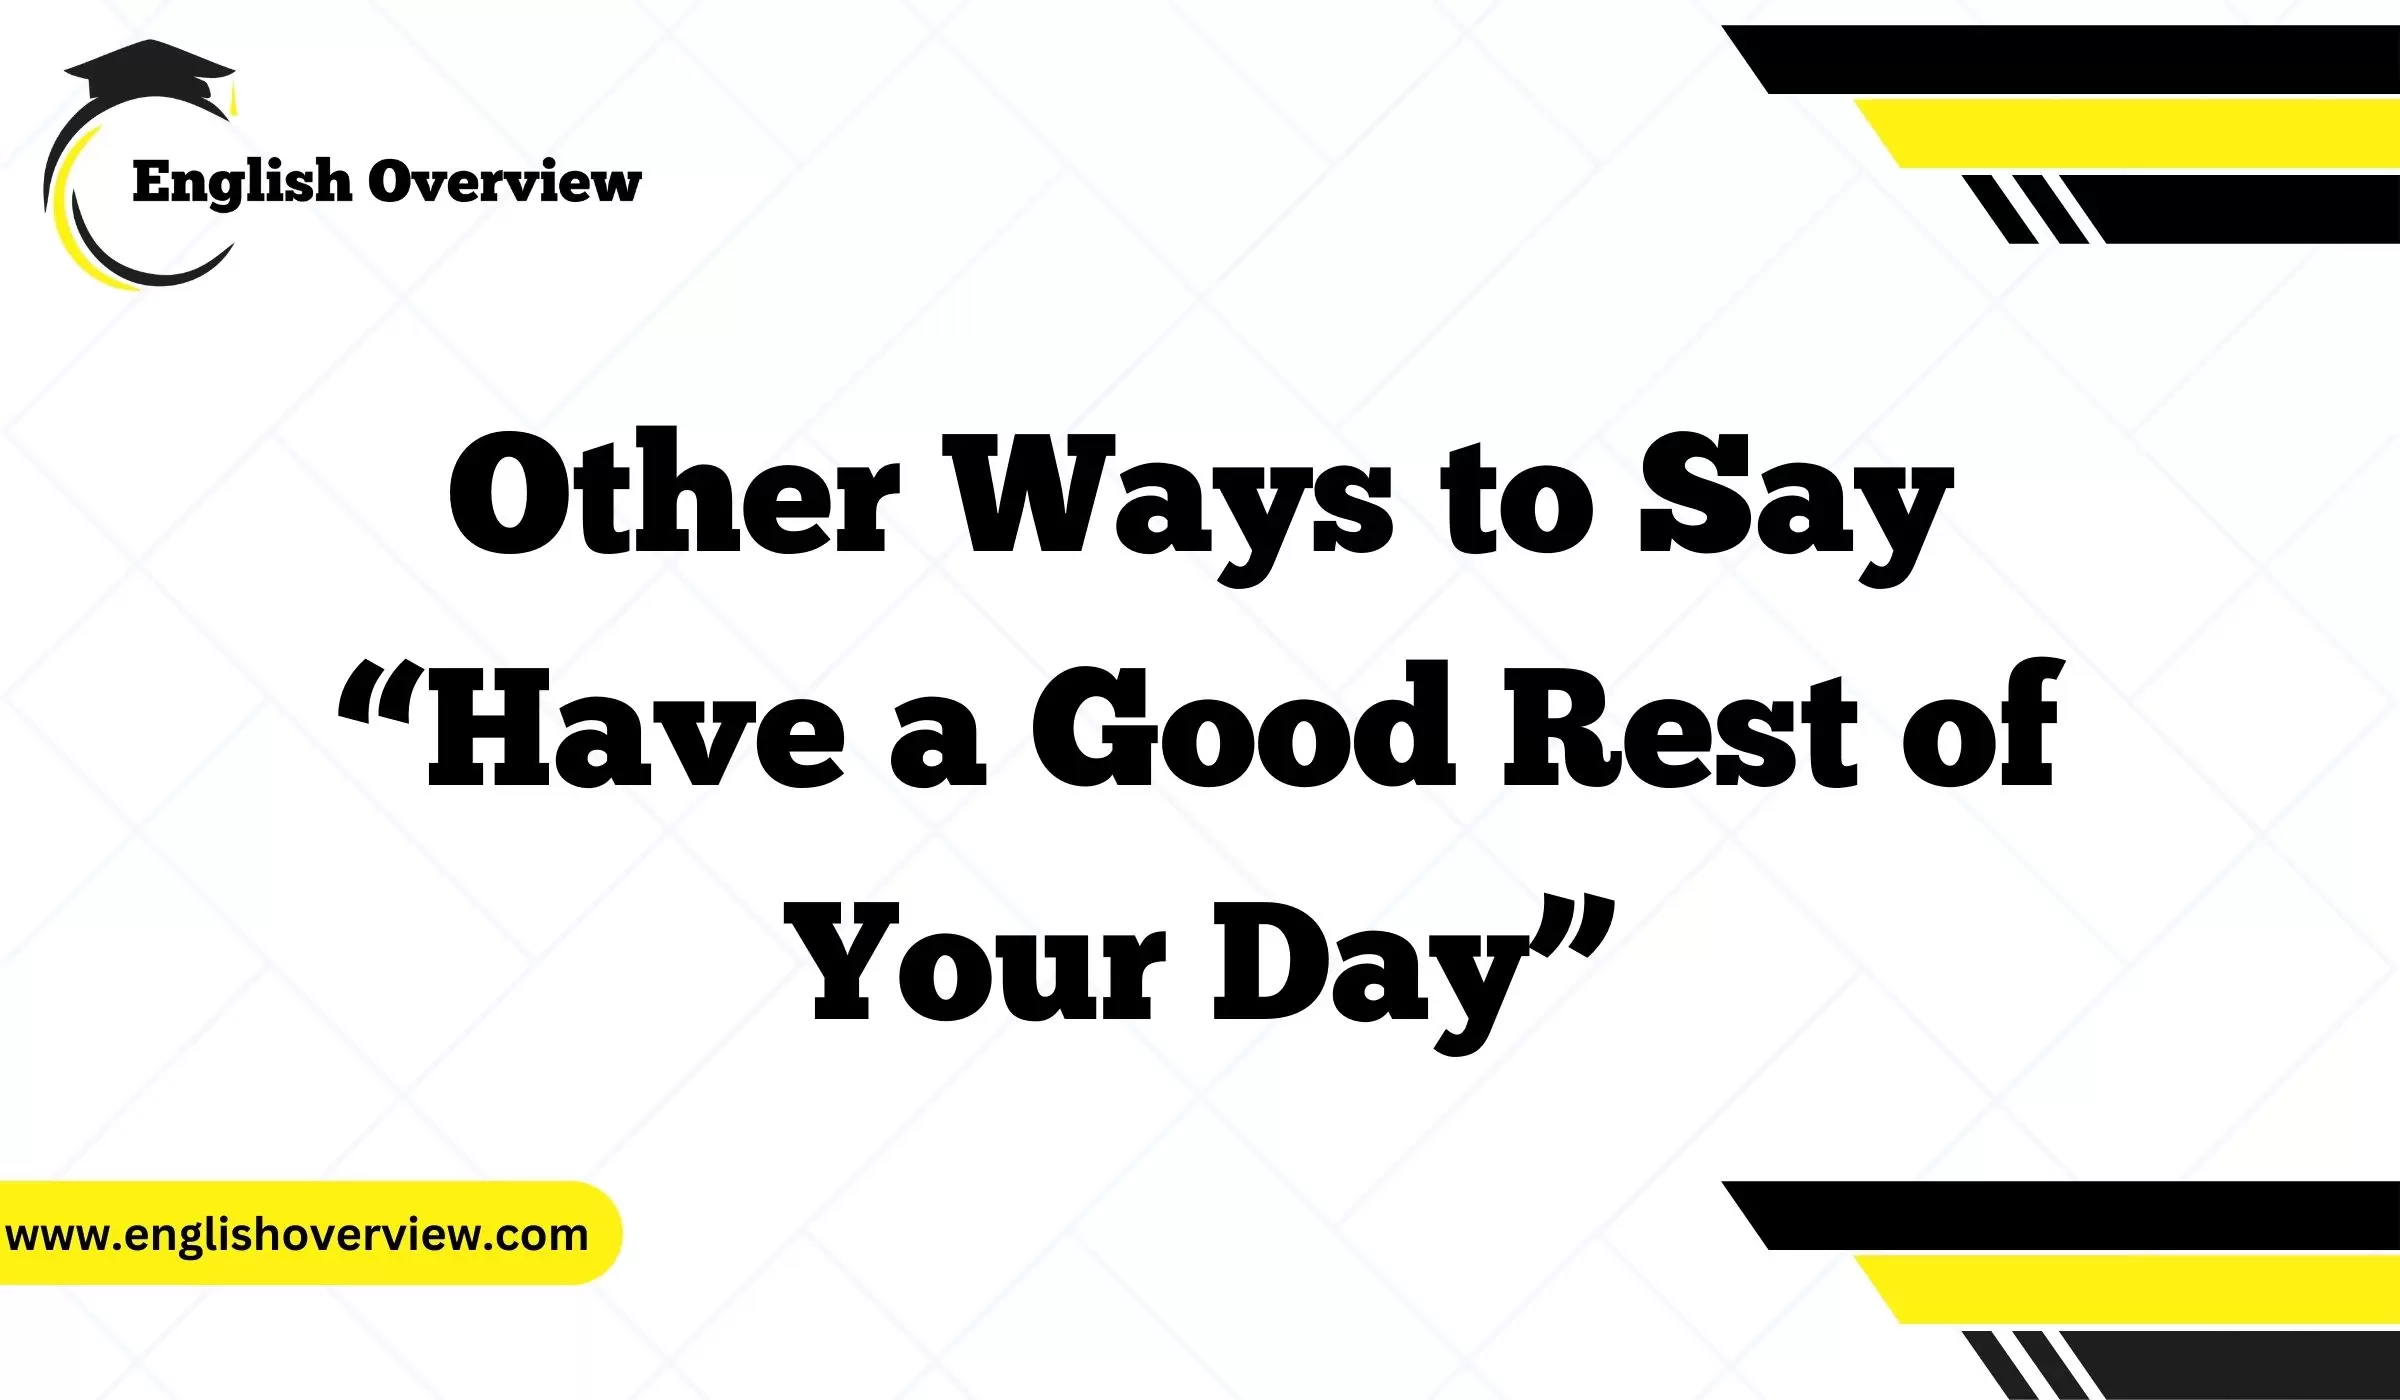 Other Ways to Say “Have a Good Rest of Your Day”